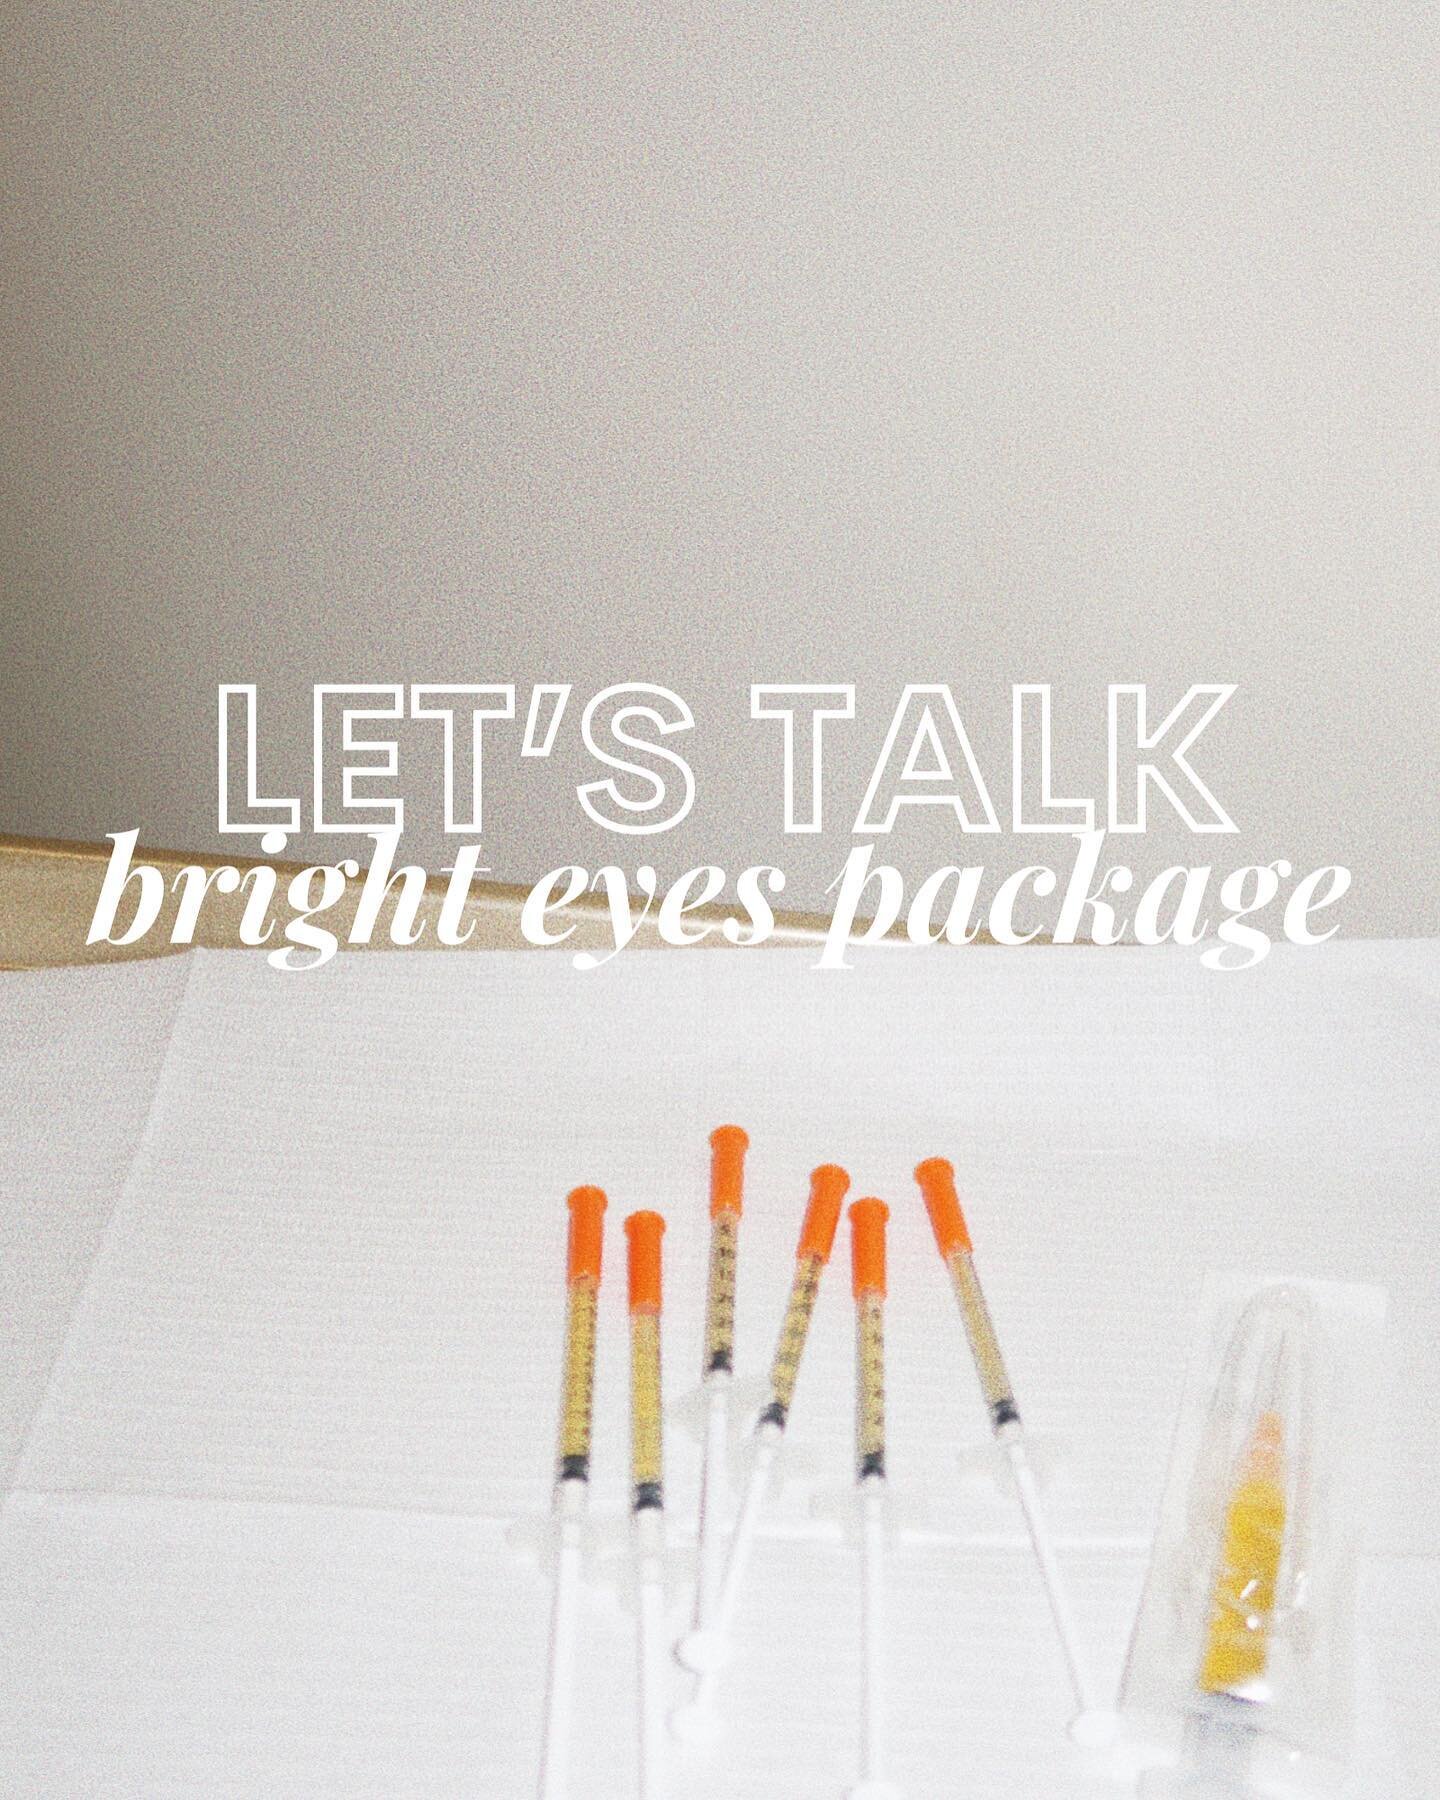 In the new year, we are bringing new packages to help you combine treatments + save money 🤍

Our bright eyes package includes 3 sessions of PRP/PRF injections, filler for mid face support + tear trough, 4 treatment sessions total, &amp; savings of $